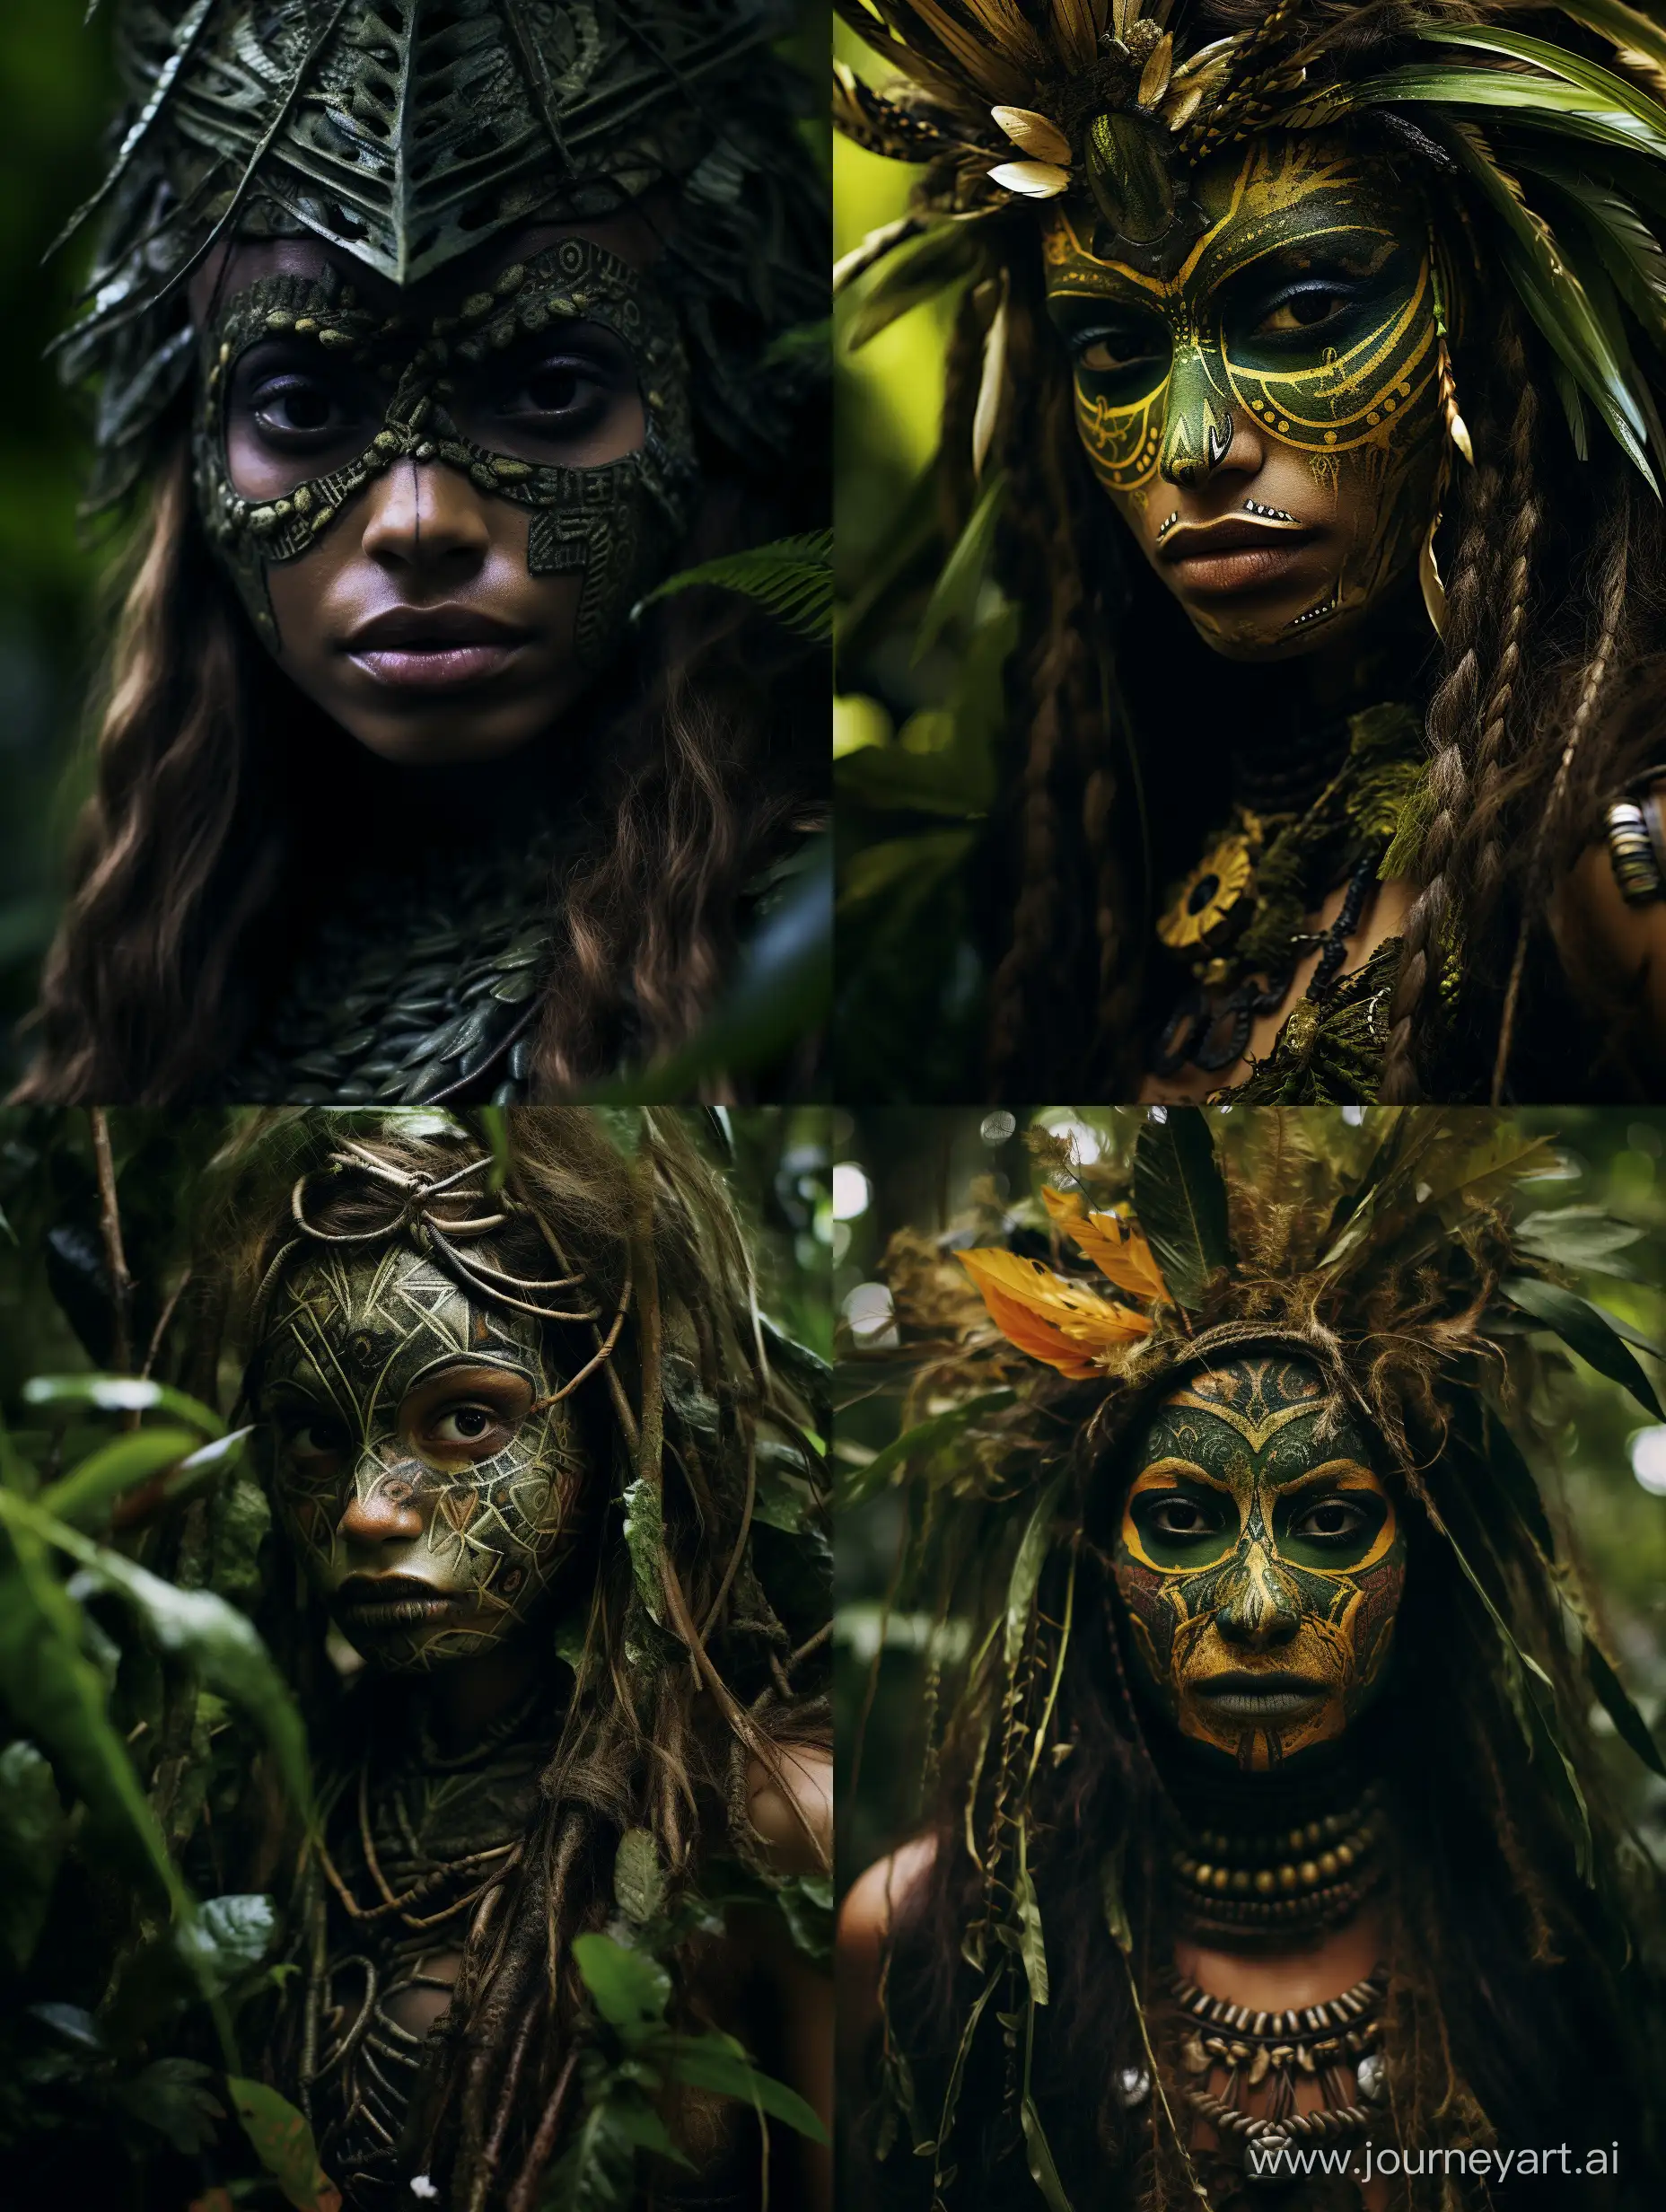 In the heart of an untamed jungle, where the foliage danced to the rhythm of whispers and shadows, lived a peculiar tribe known as the Whisperers. They communicated not through words but through the language of nature itself - the rustle of leaves, the song of birds, and the murmurs of the wind. Each member of the tribe possessed an innate connection to the jungle, a bond forged through generations of living in harmony with its secrets.

